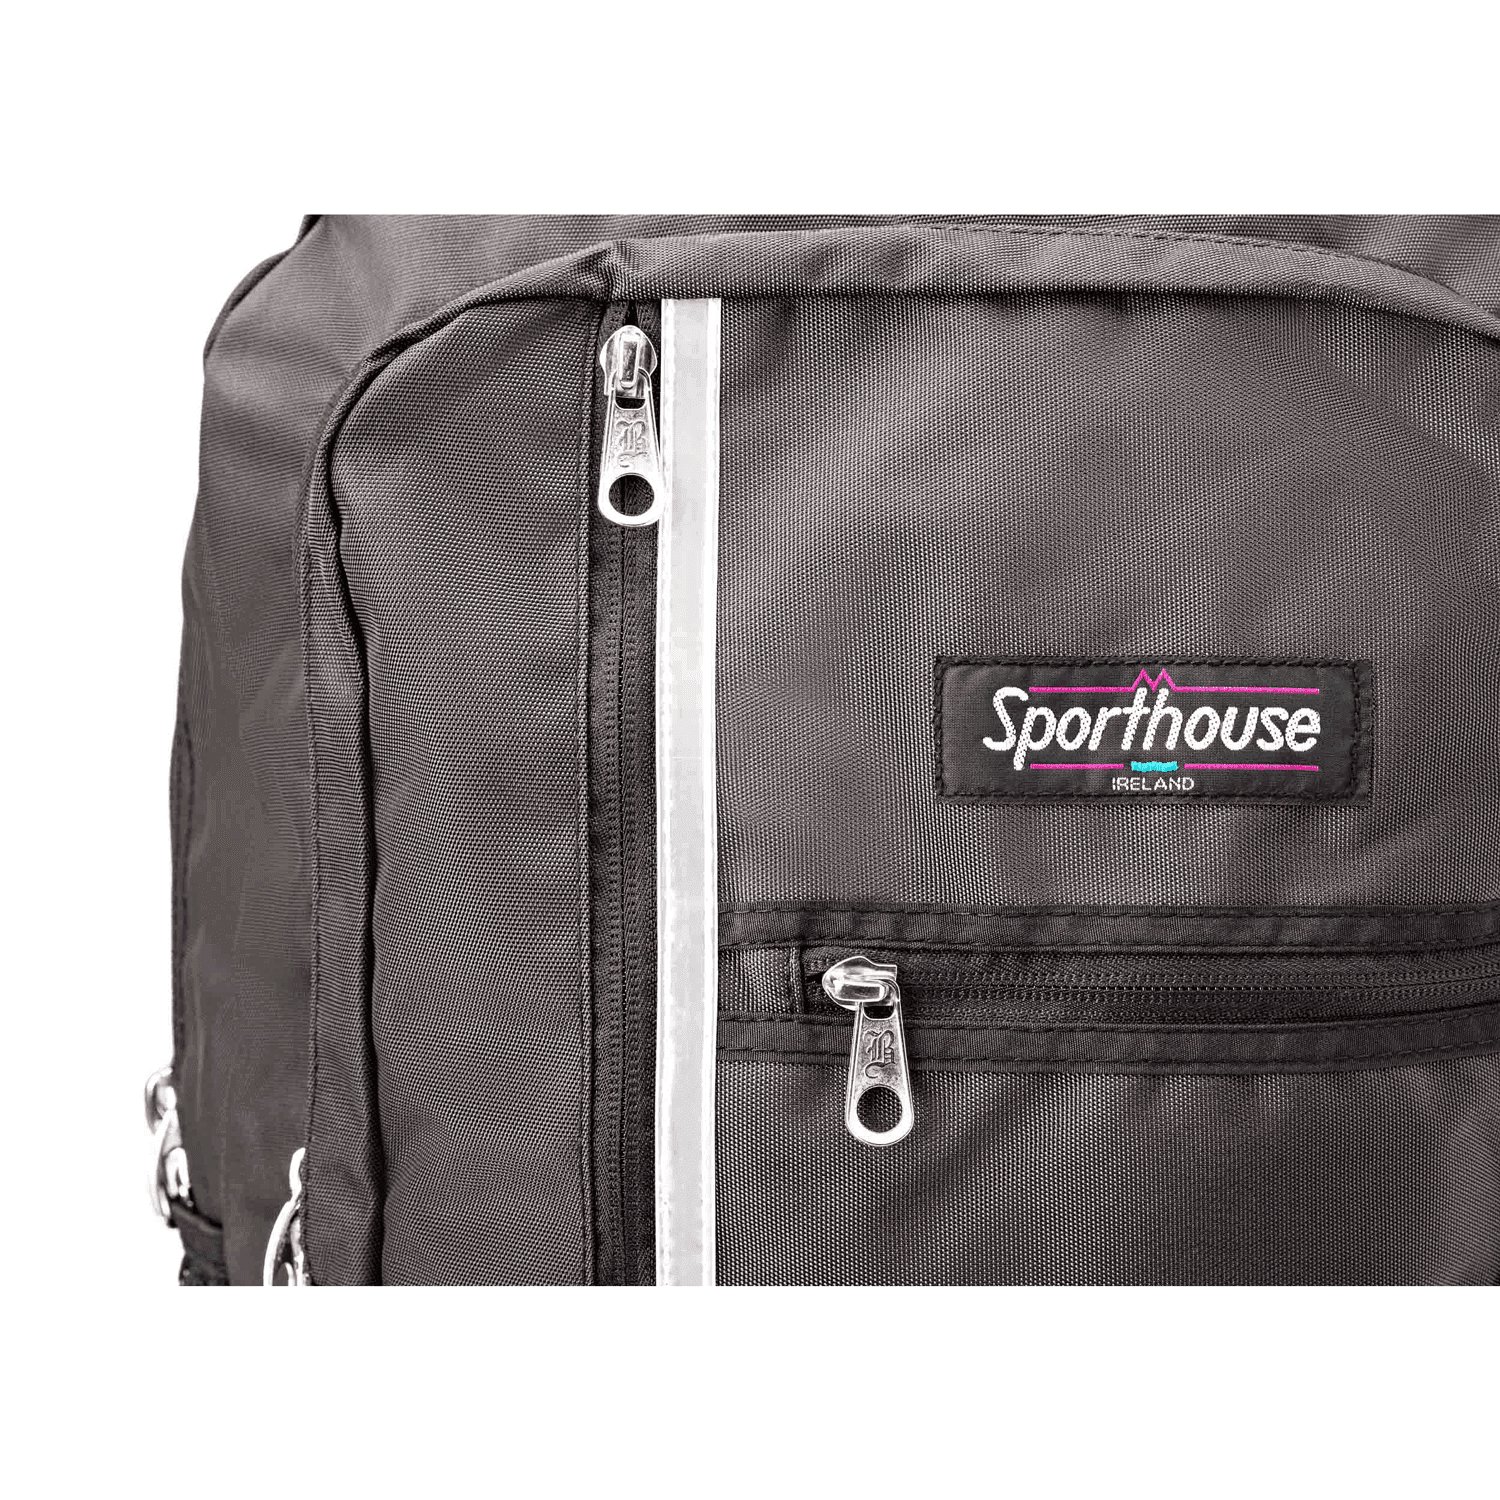 Sporthouse Student 2000 42L Backpack - Black/Grey 5 Shaws Department Stores